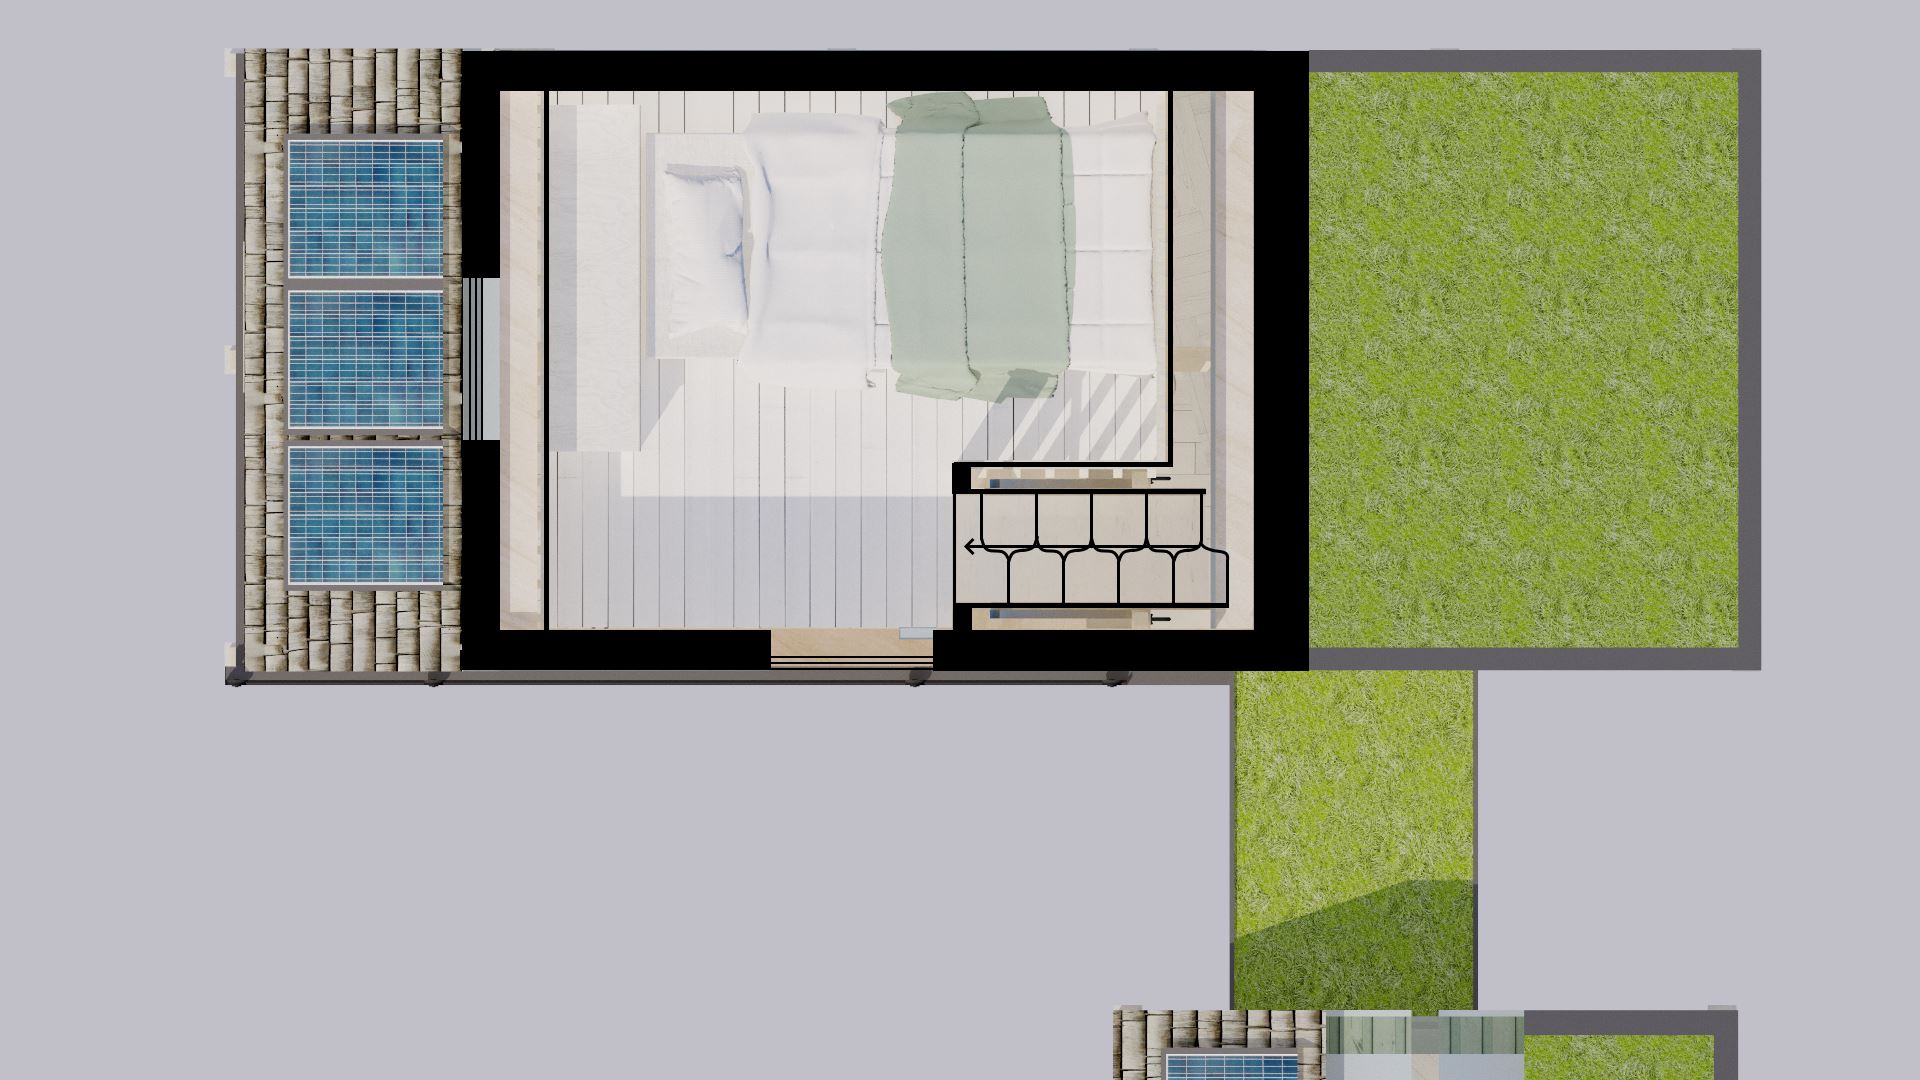 A plan view of the sleeping loft.